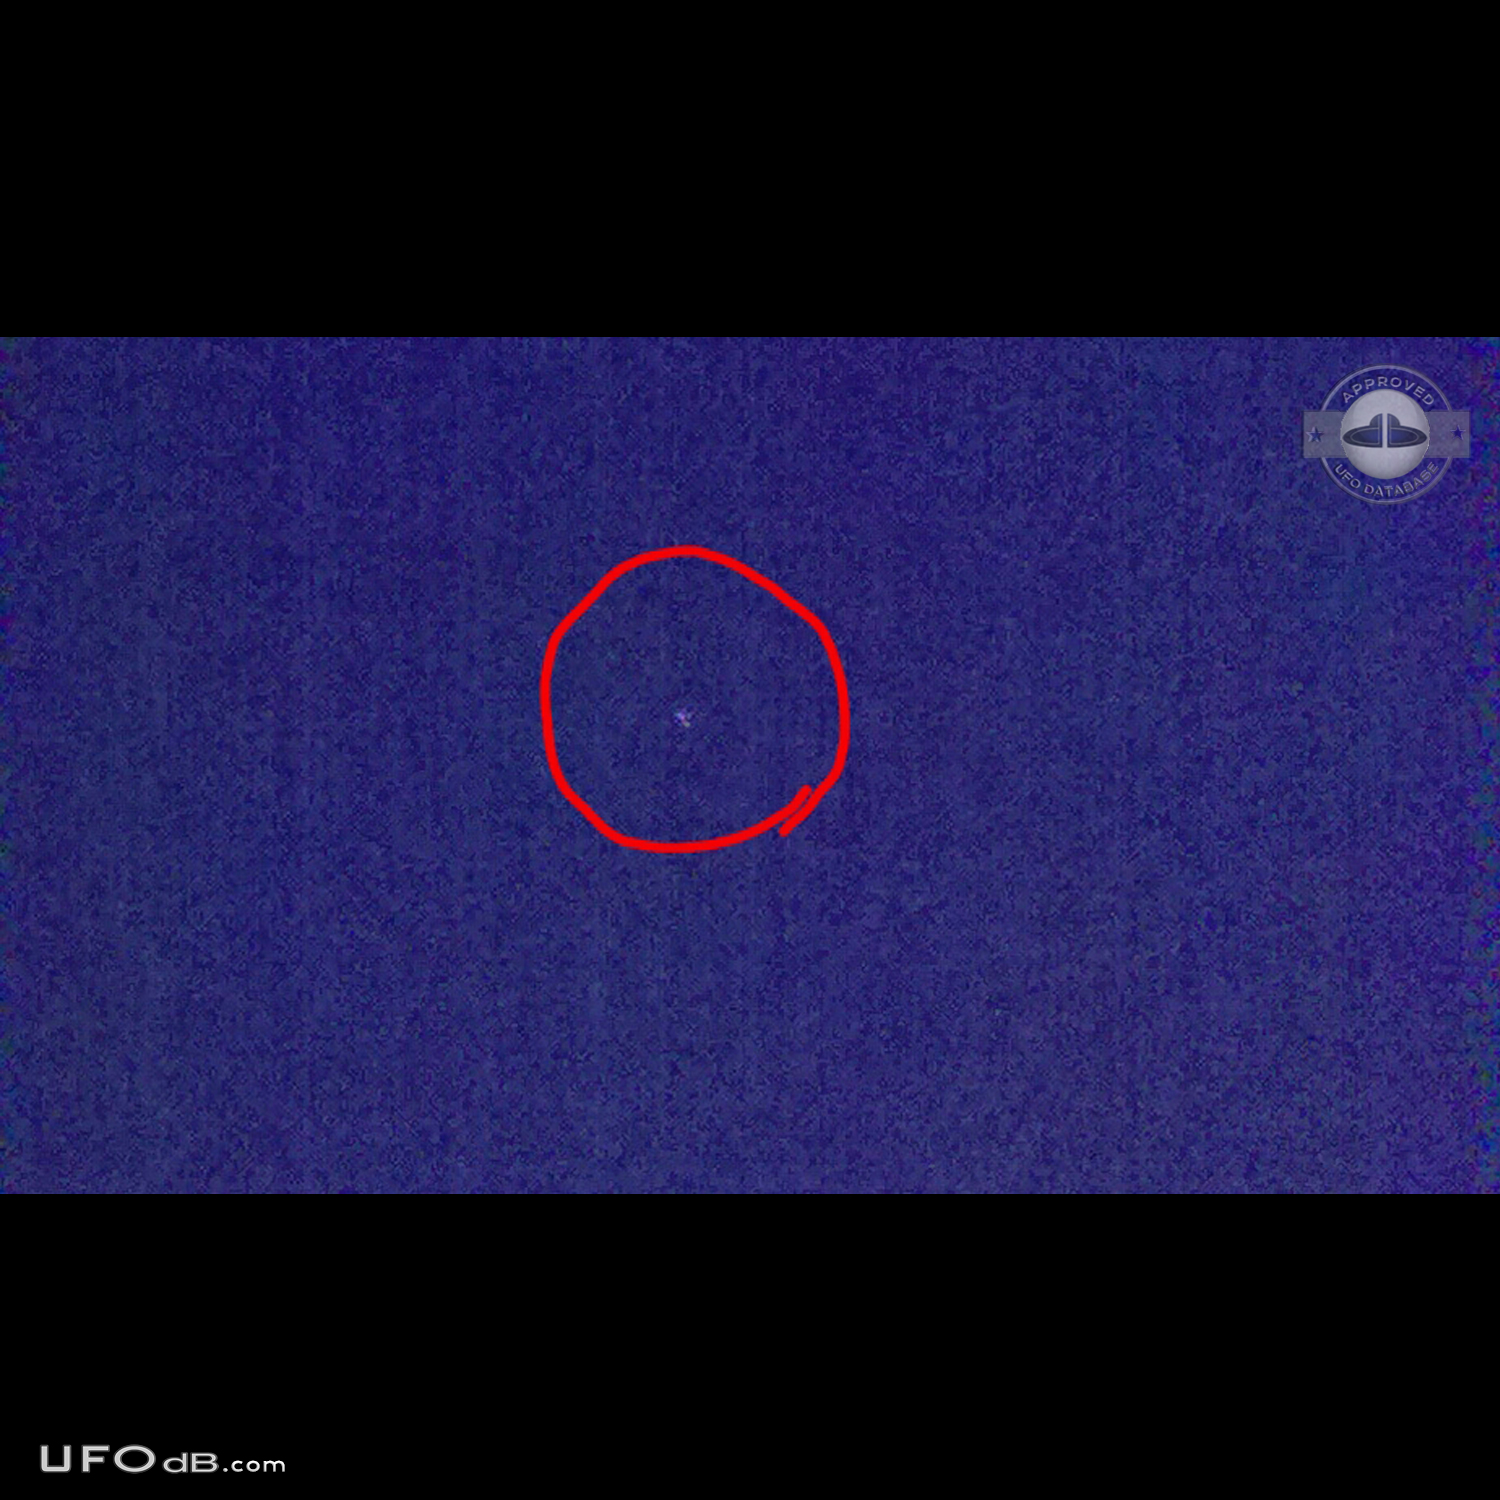 Coloful twinkling Star shaped UFO seen over Chicago, Illinois  2012 UFO Picture #500-1